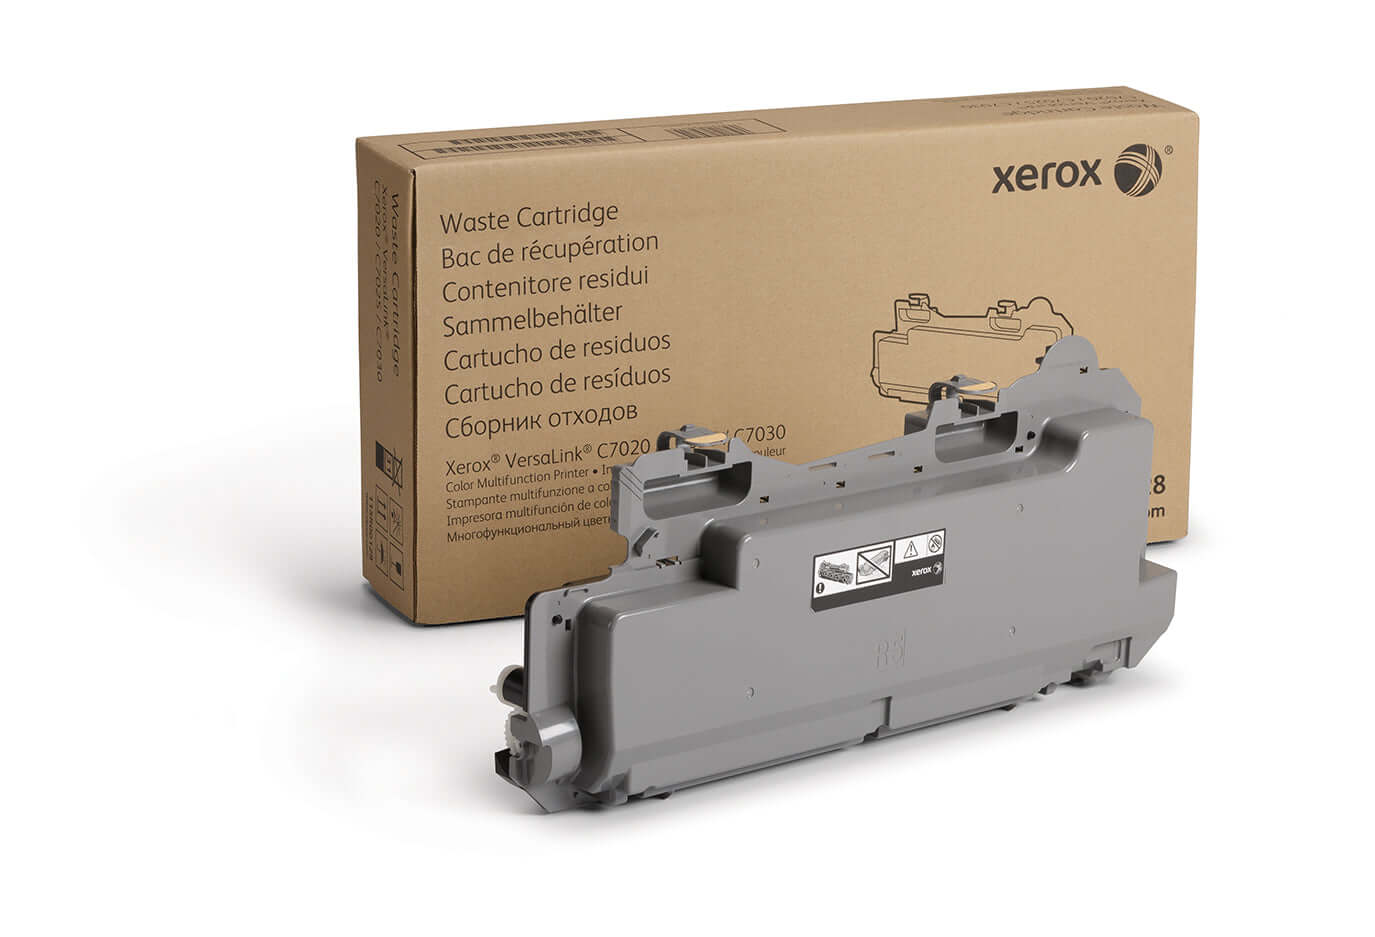 Xerox Waste Toner Container for VersaLink MFP - 115R00128